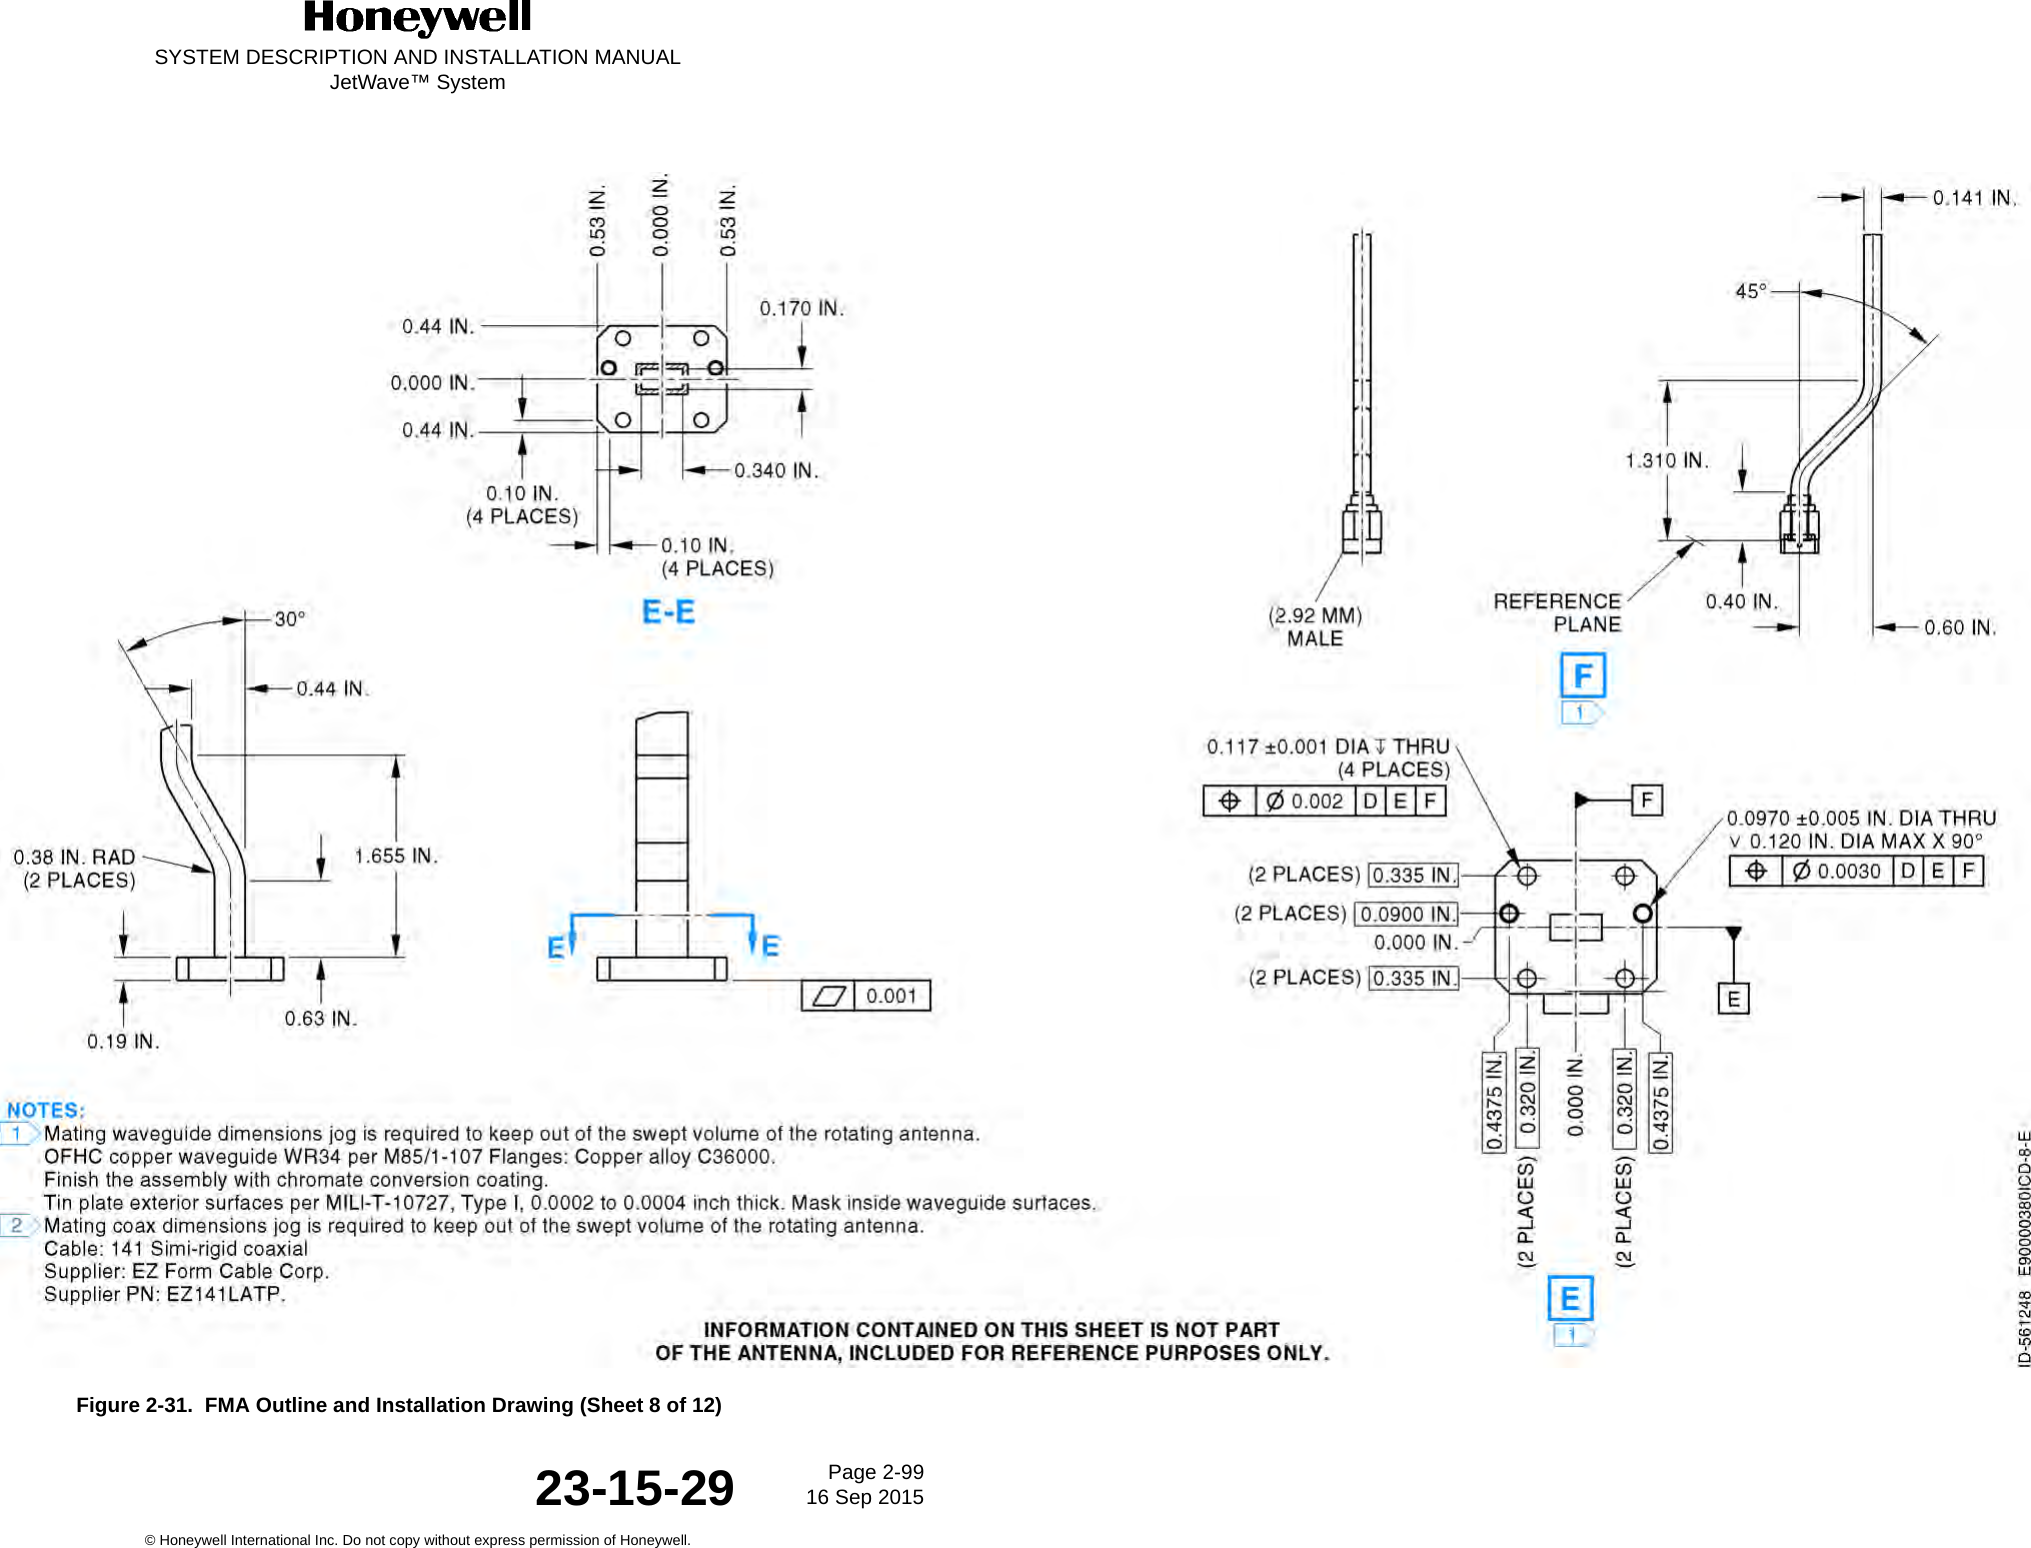 SYSTEM DESCRIPTION AND INSTALLATION MANUALJetWave™ SystemPage 2-99 16 Sep 2015© Honeywell International Inc. Do not copy without express permission of Honeywell.23-15-29Figure 2-31.  FMA Outline and Installation Drawing (Sheet 8 of 12)